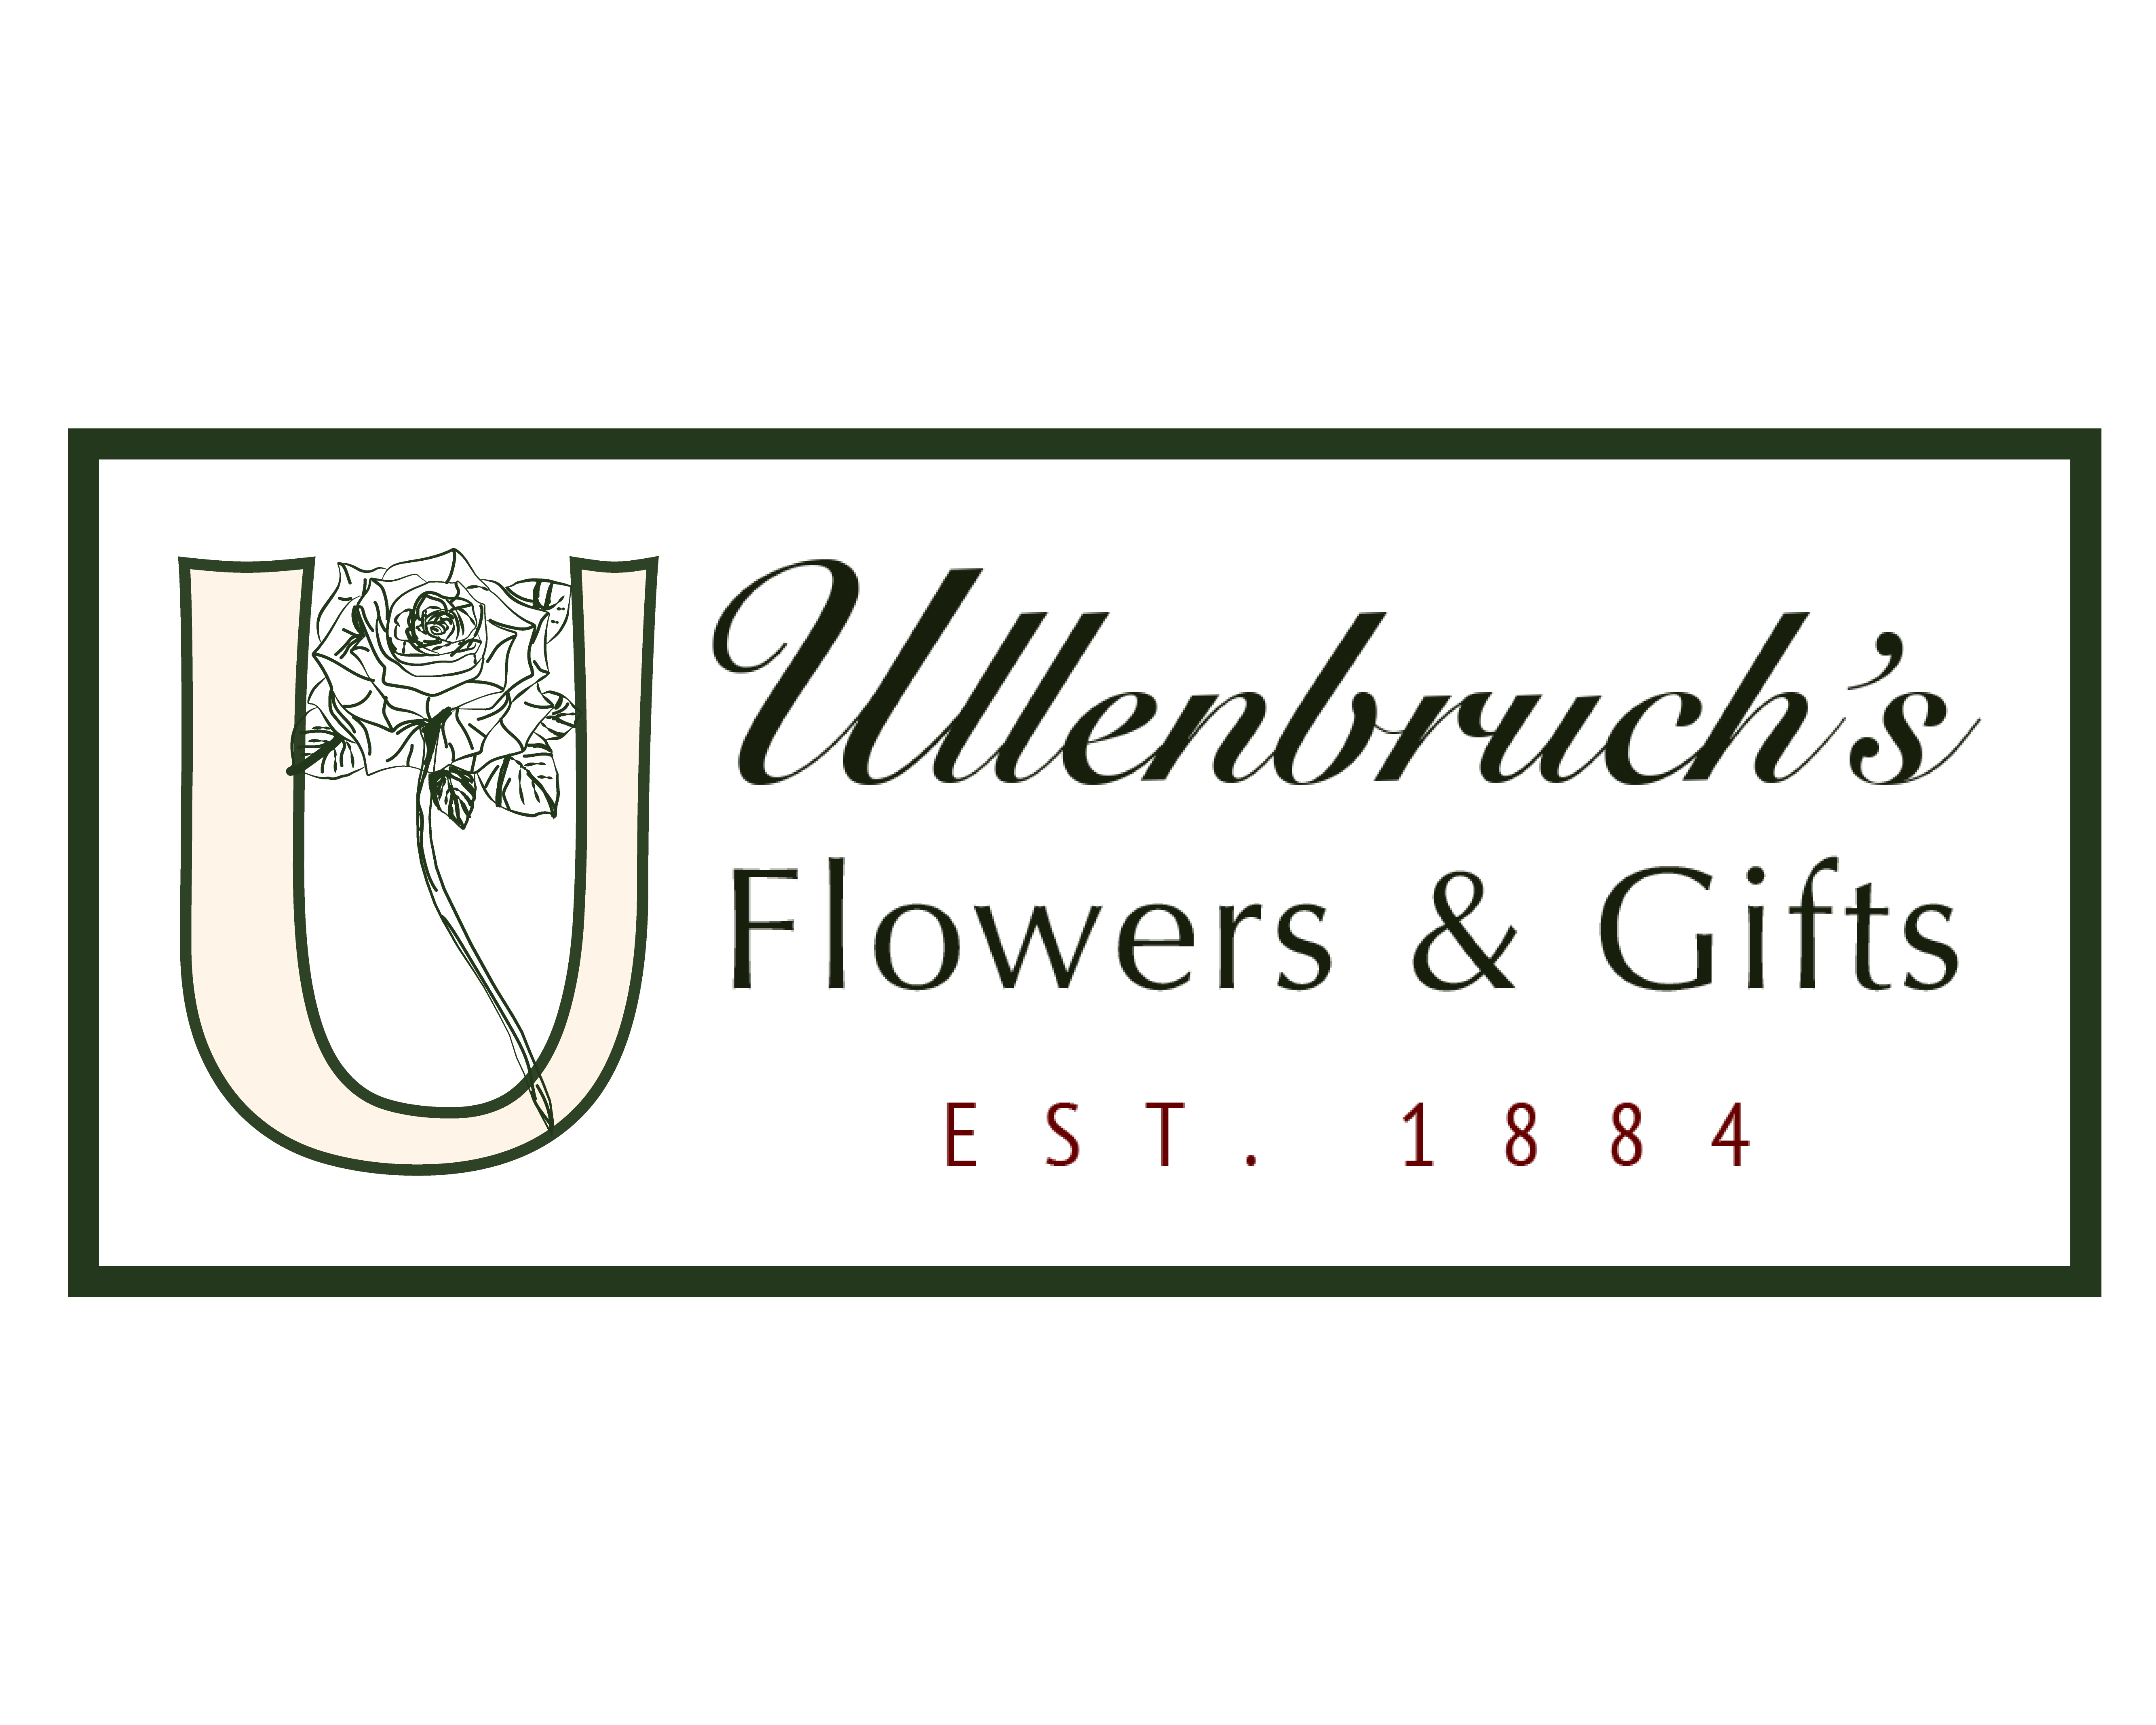 Weddings by Ullenbruch's Flowers & Gifts | Port Huron, MI